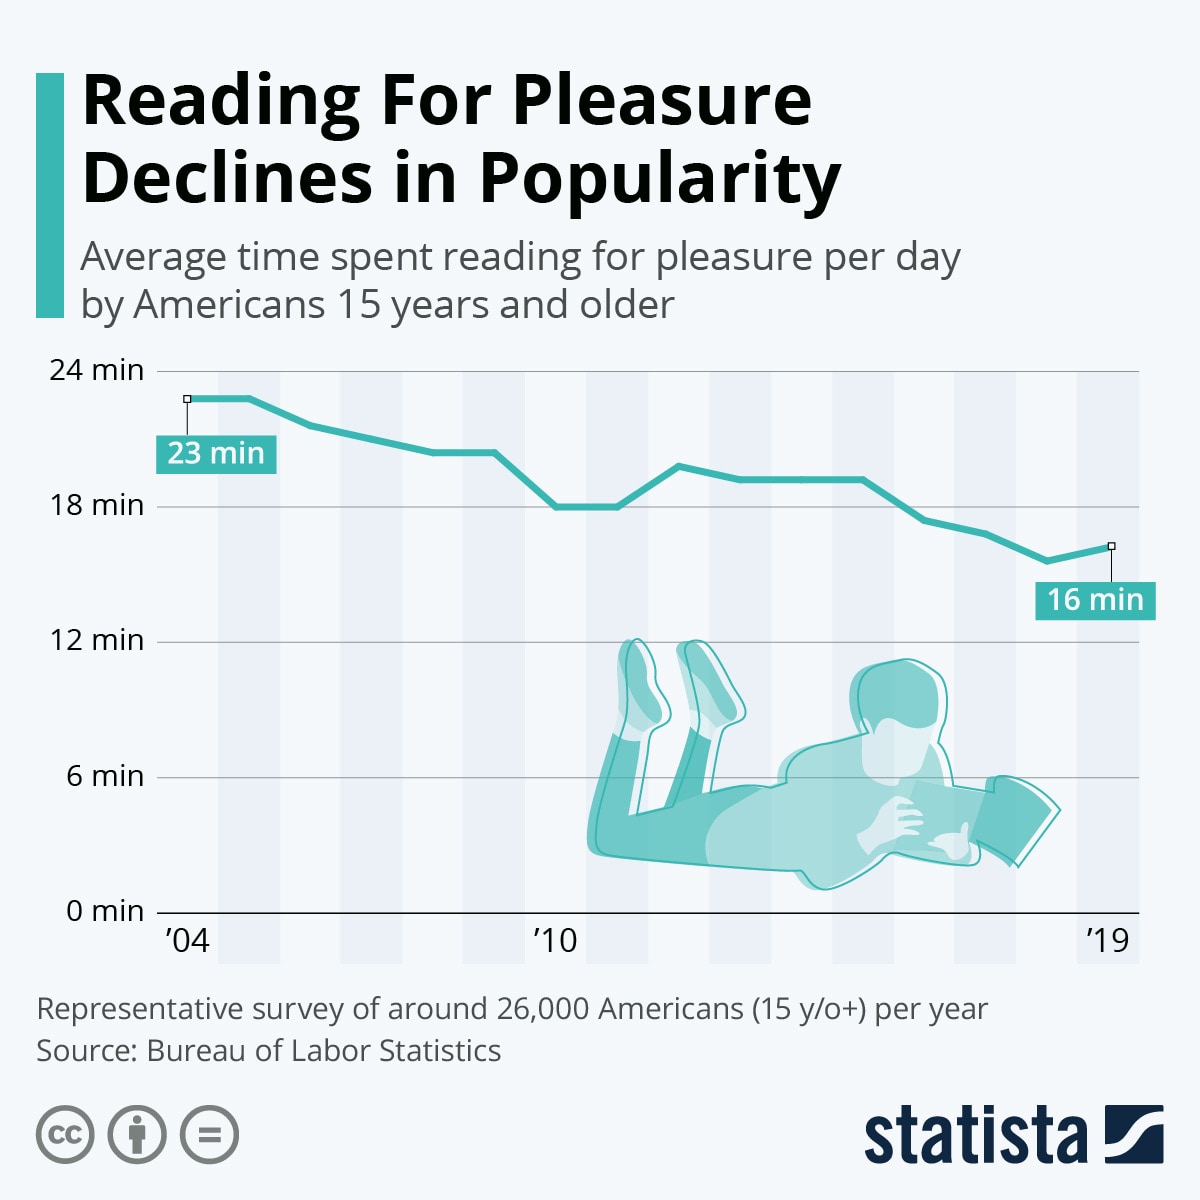 Reading for pleasure declined since 2004 by almost one-third